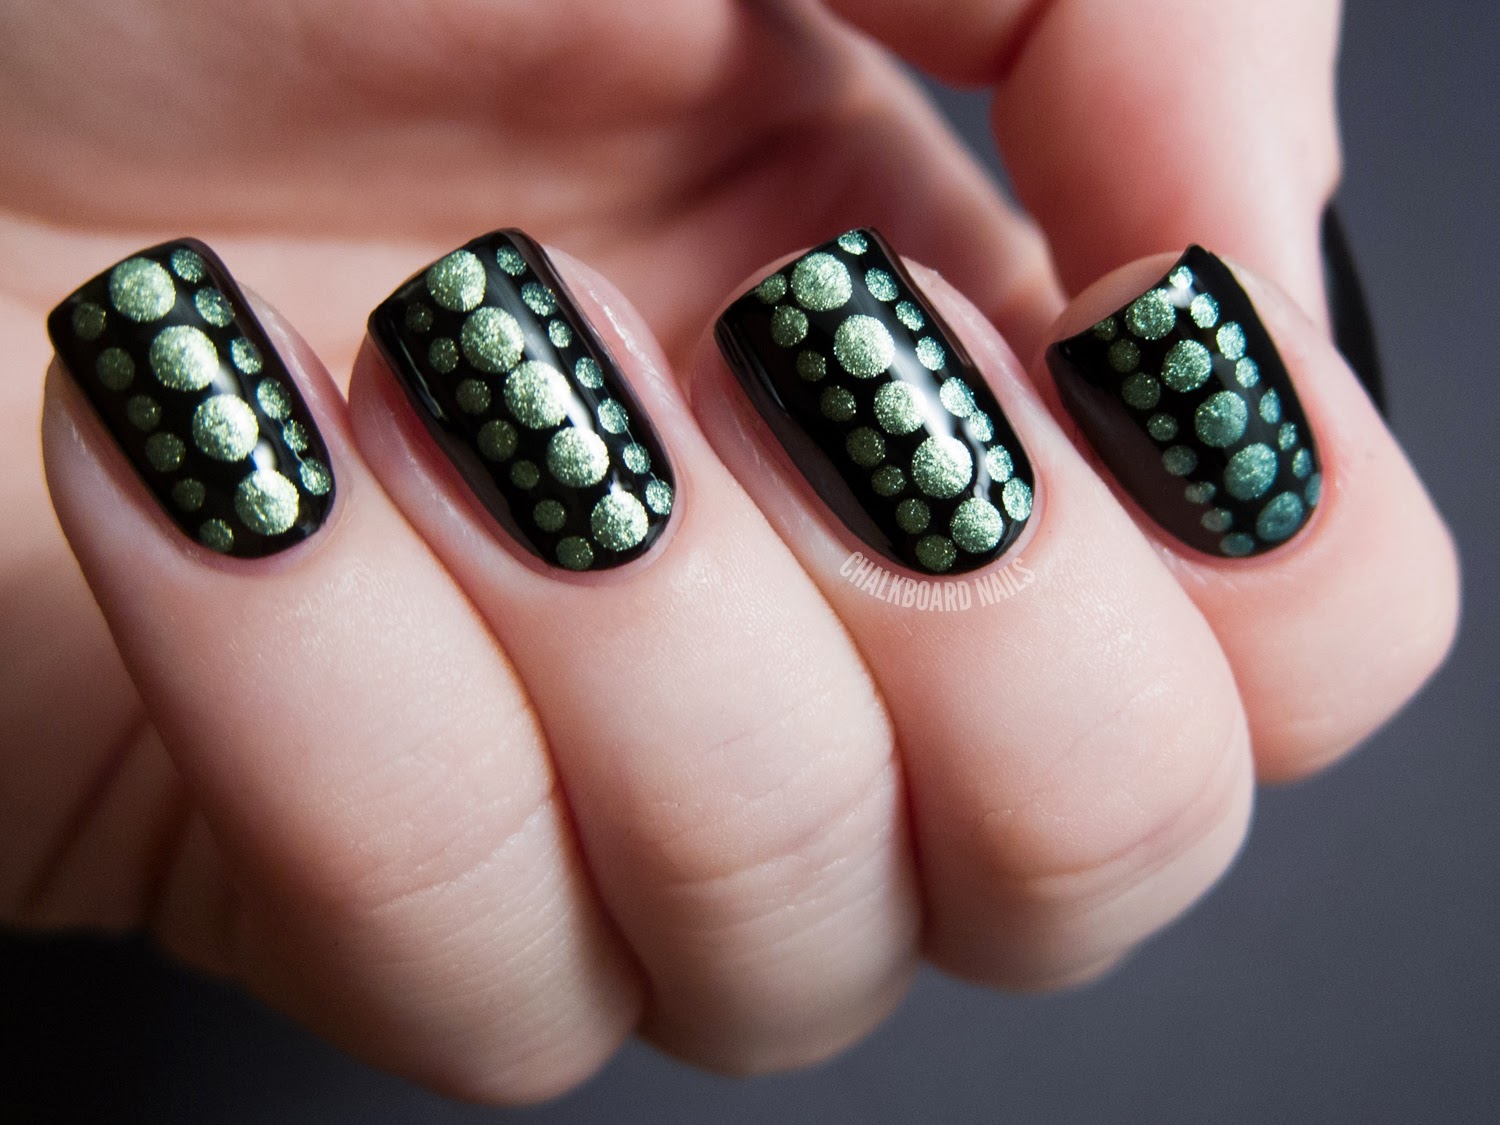 2. Middle Dot Nail Art - wide 7